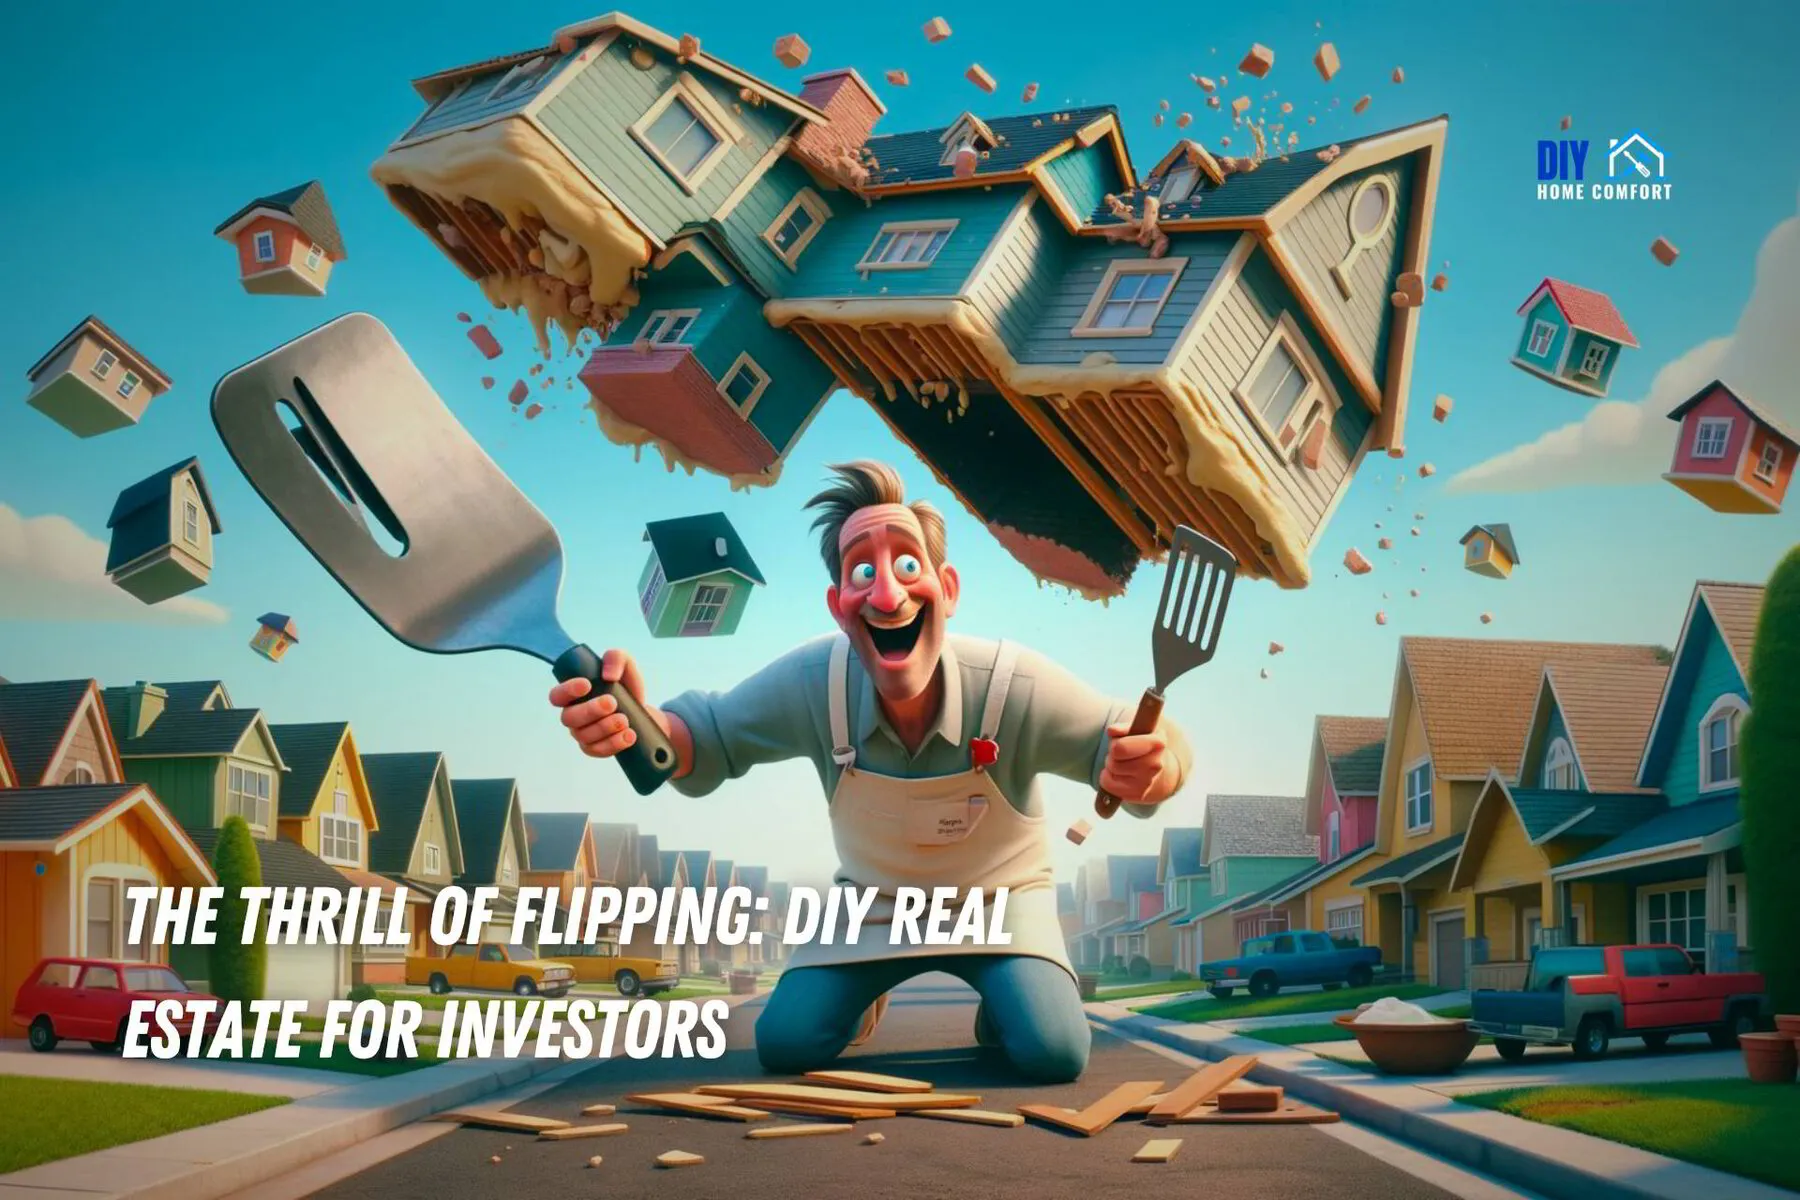 The Thrill of Flipping: DIY Real Estate for Investors | DIY Home Comfort